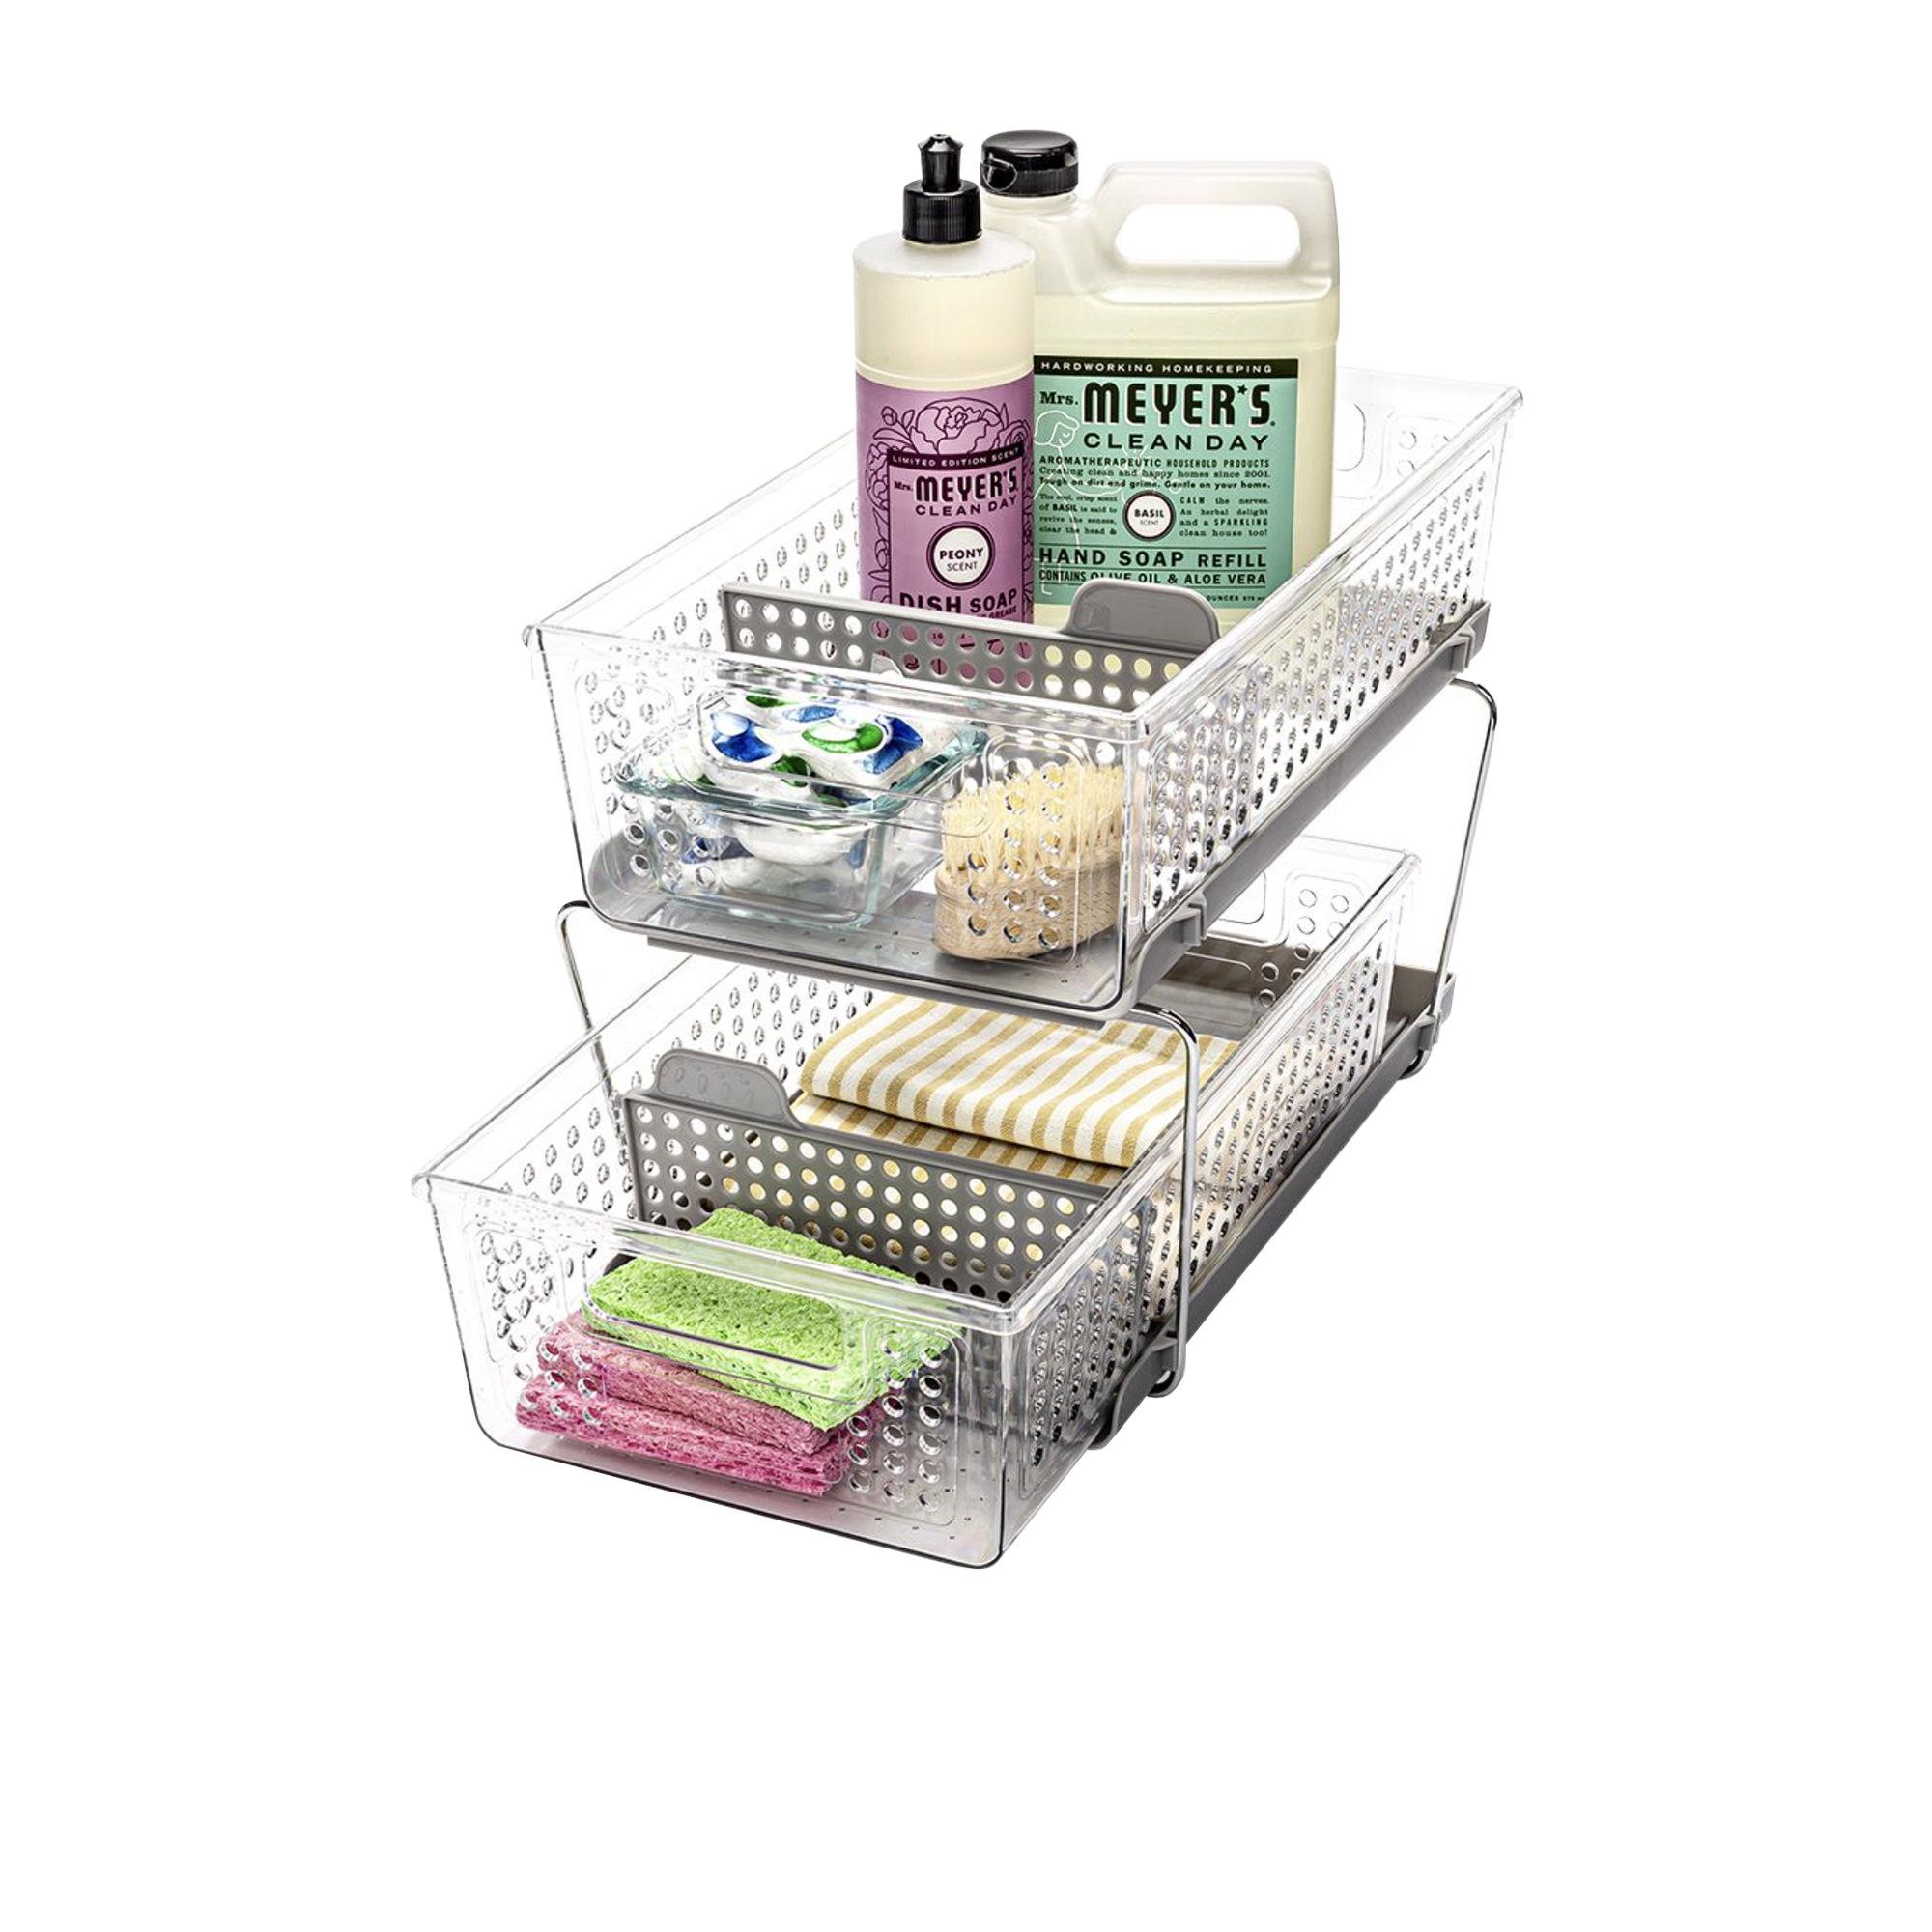 Madesmart 2 Tier Storage Organiser with Dividers Clear Image 3